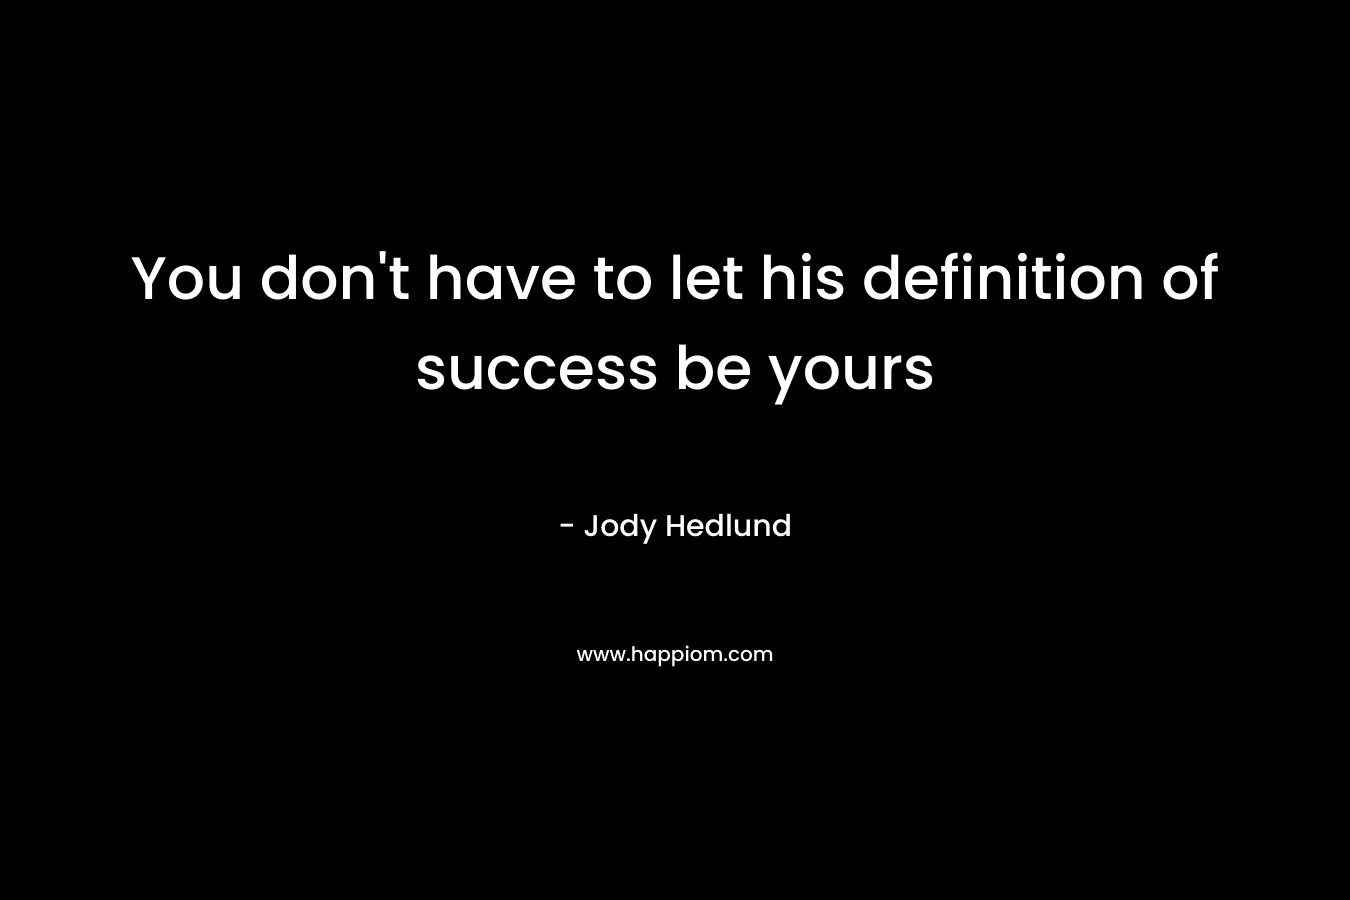 You don’t have to let his definition of success be yours – Jody Hedlund